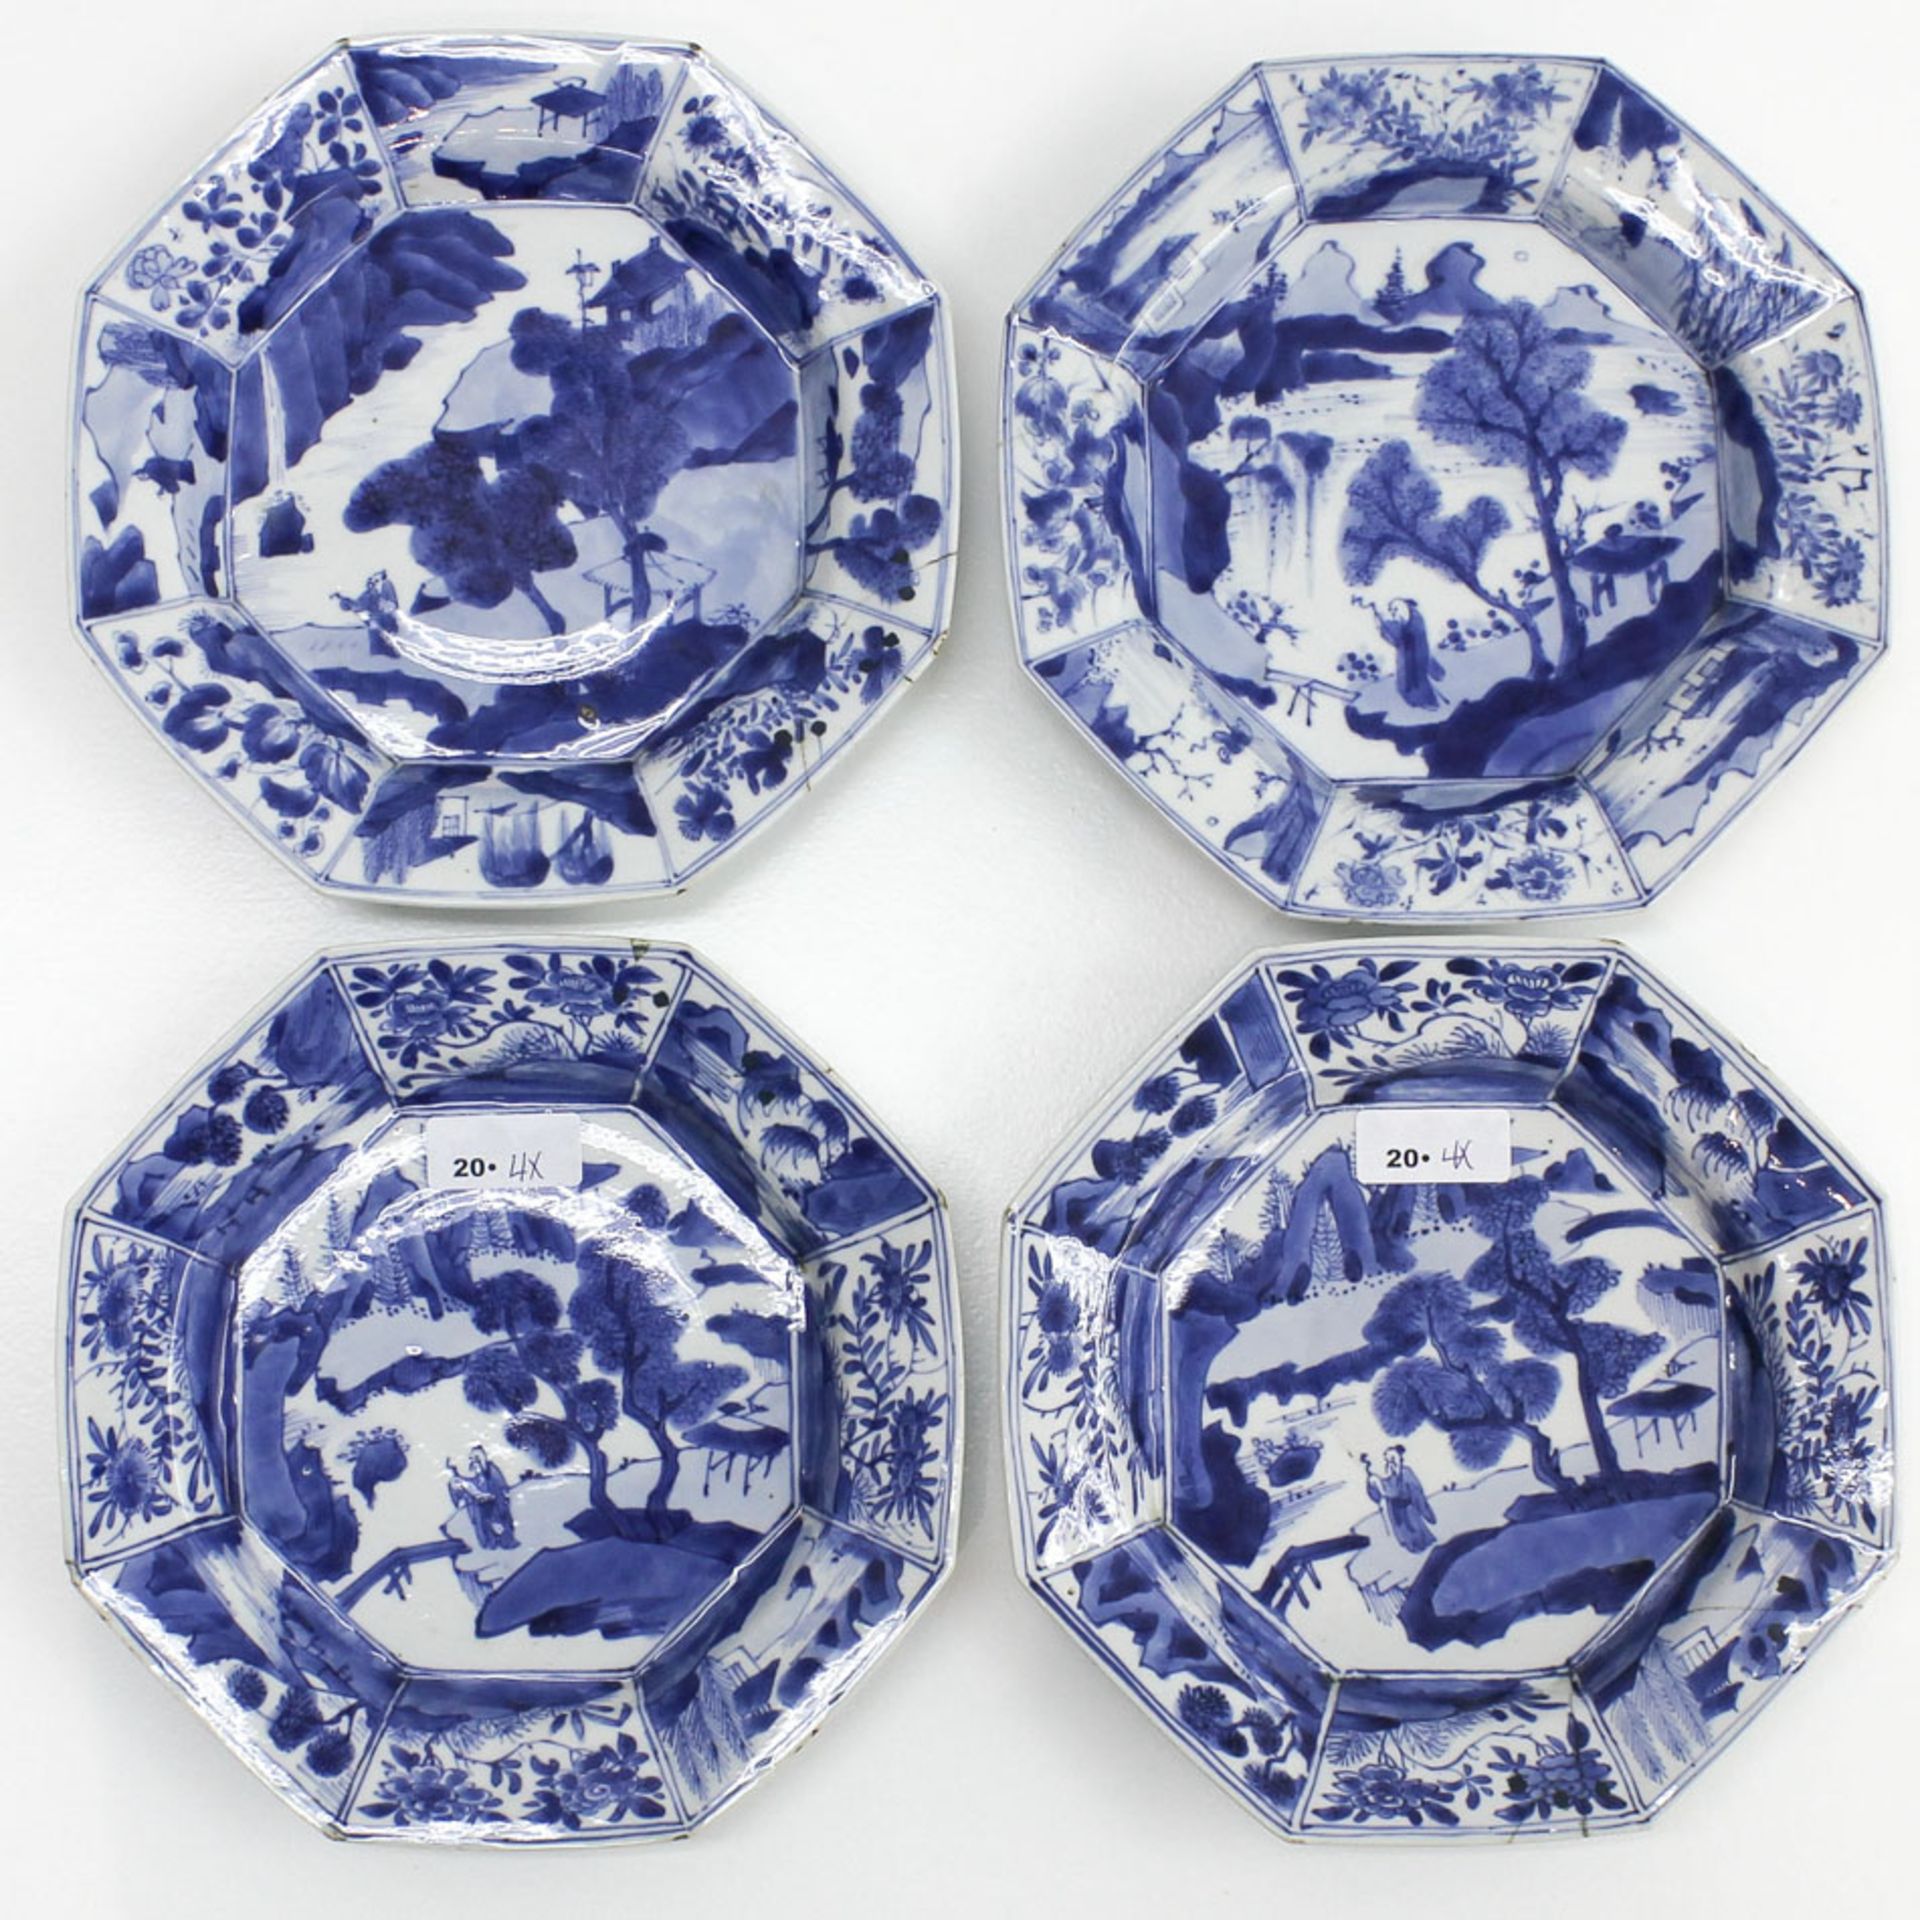 Lot of 4 18th Century China Porcelain Plates Blue and white decor marked with double ring on